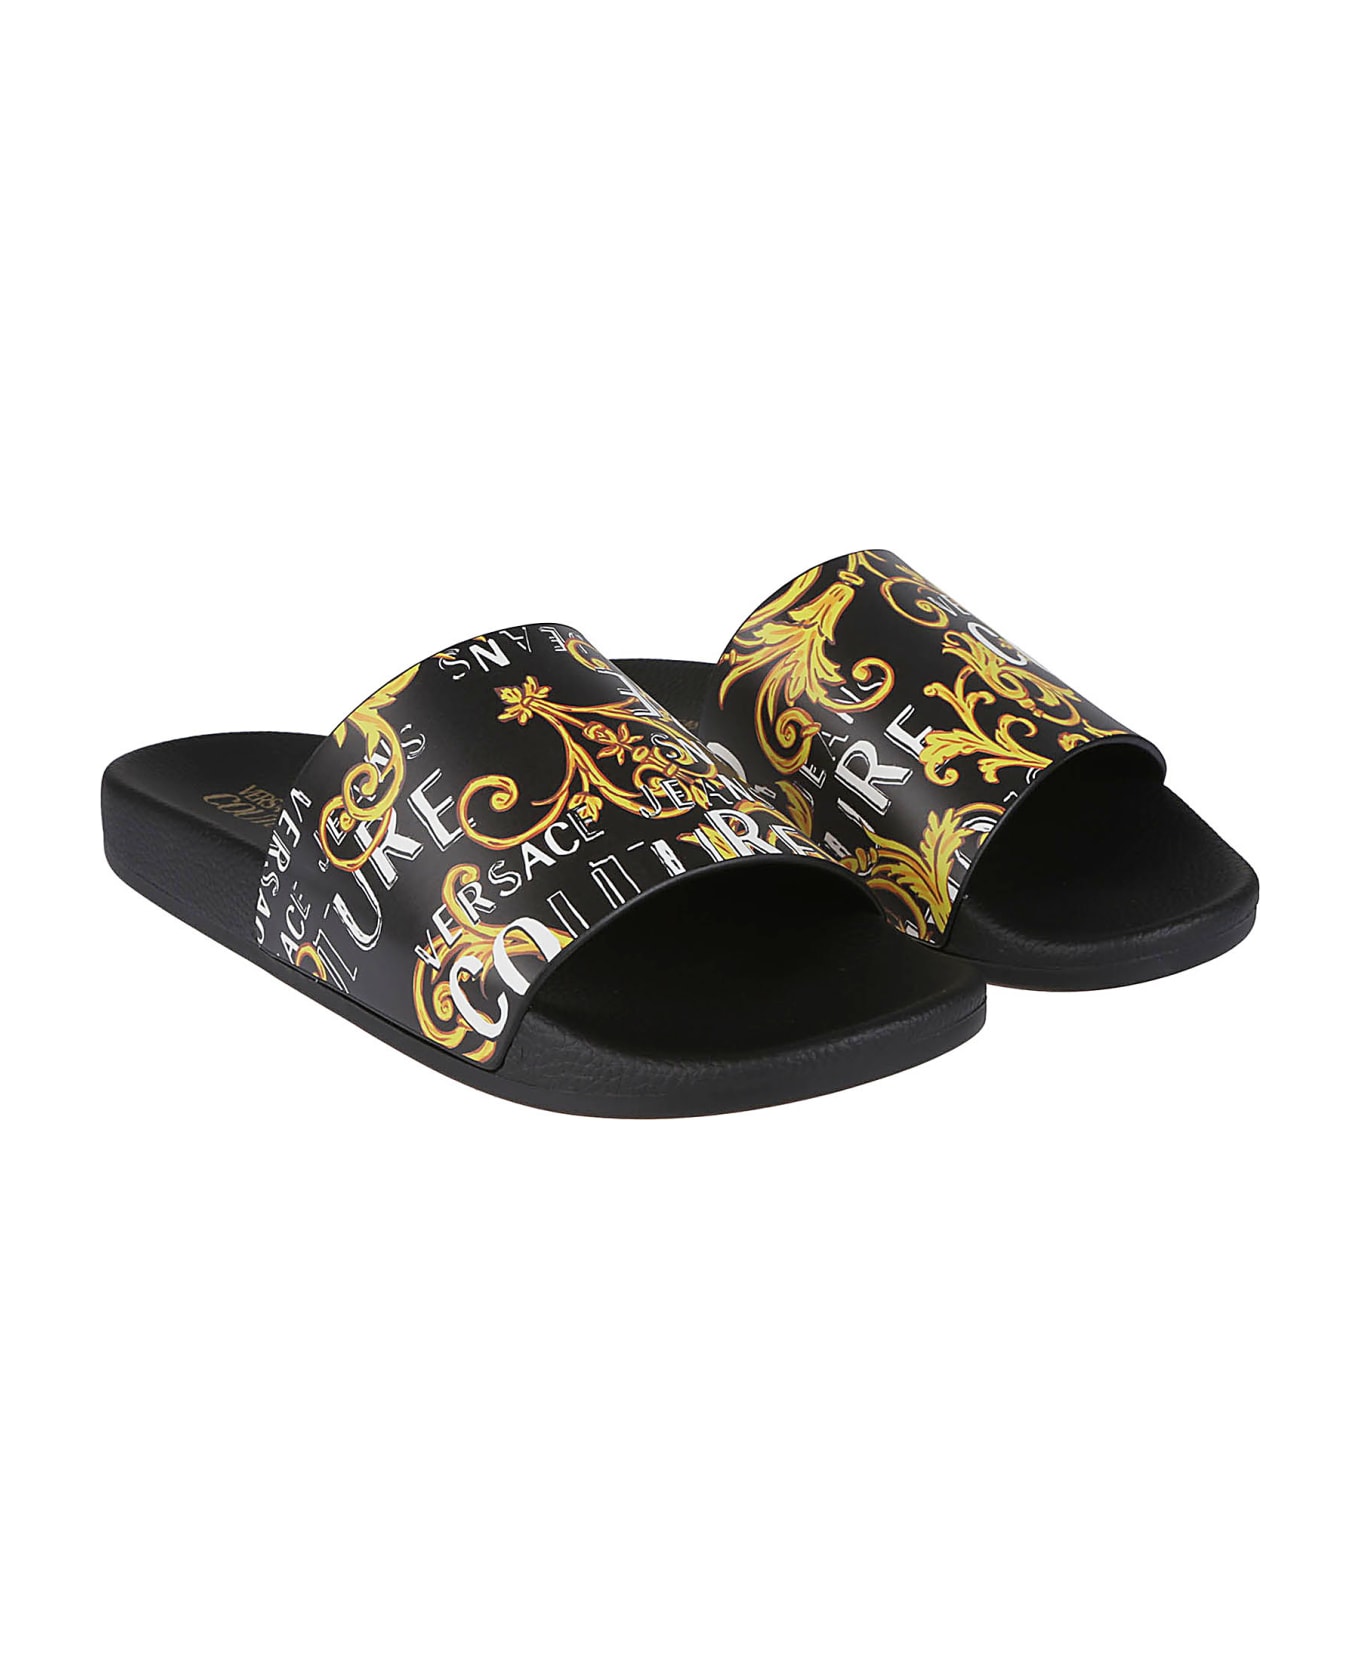 Versace Jeans Couture Gummy 38 Sliders - Black/gold その他各種シューズ